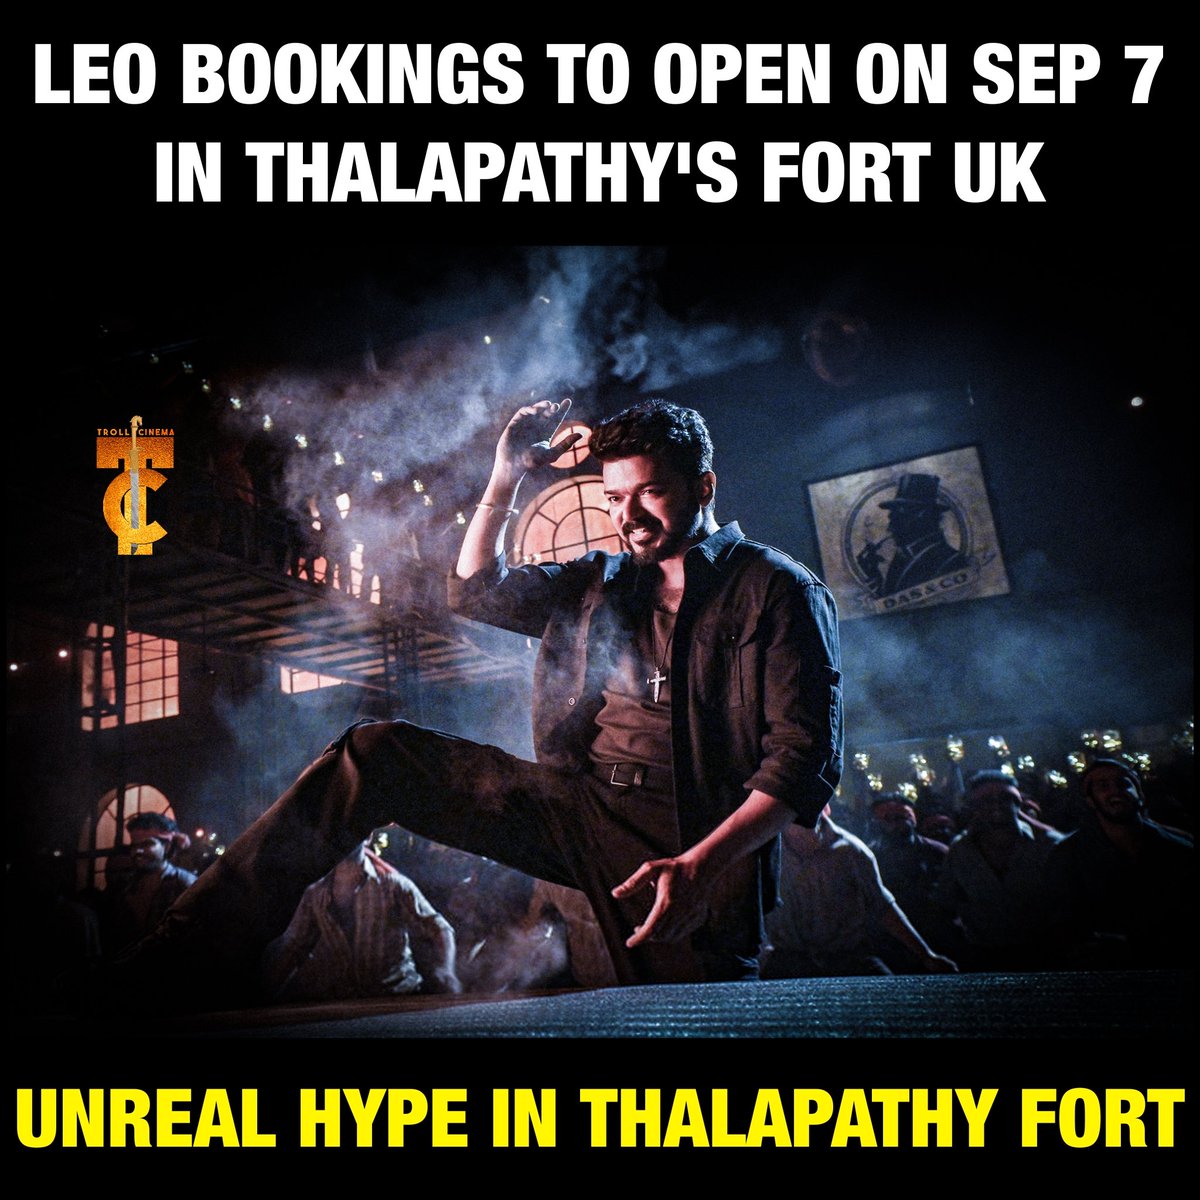 First time for an Indian film , Bookings opening 6 week before release in UK. 

#Leo #Thalapathy #AhimsaEntertainment #7screenStudios